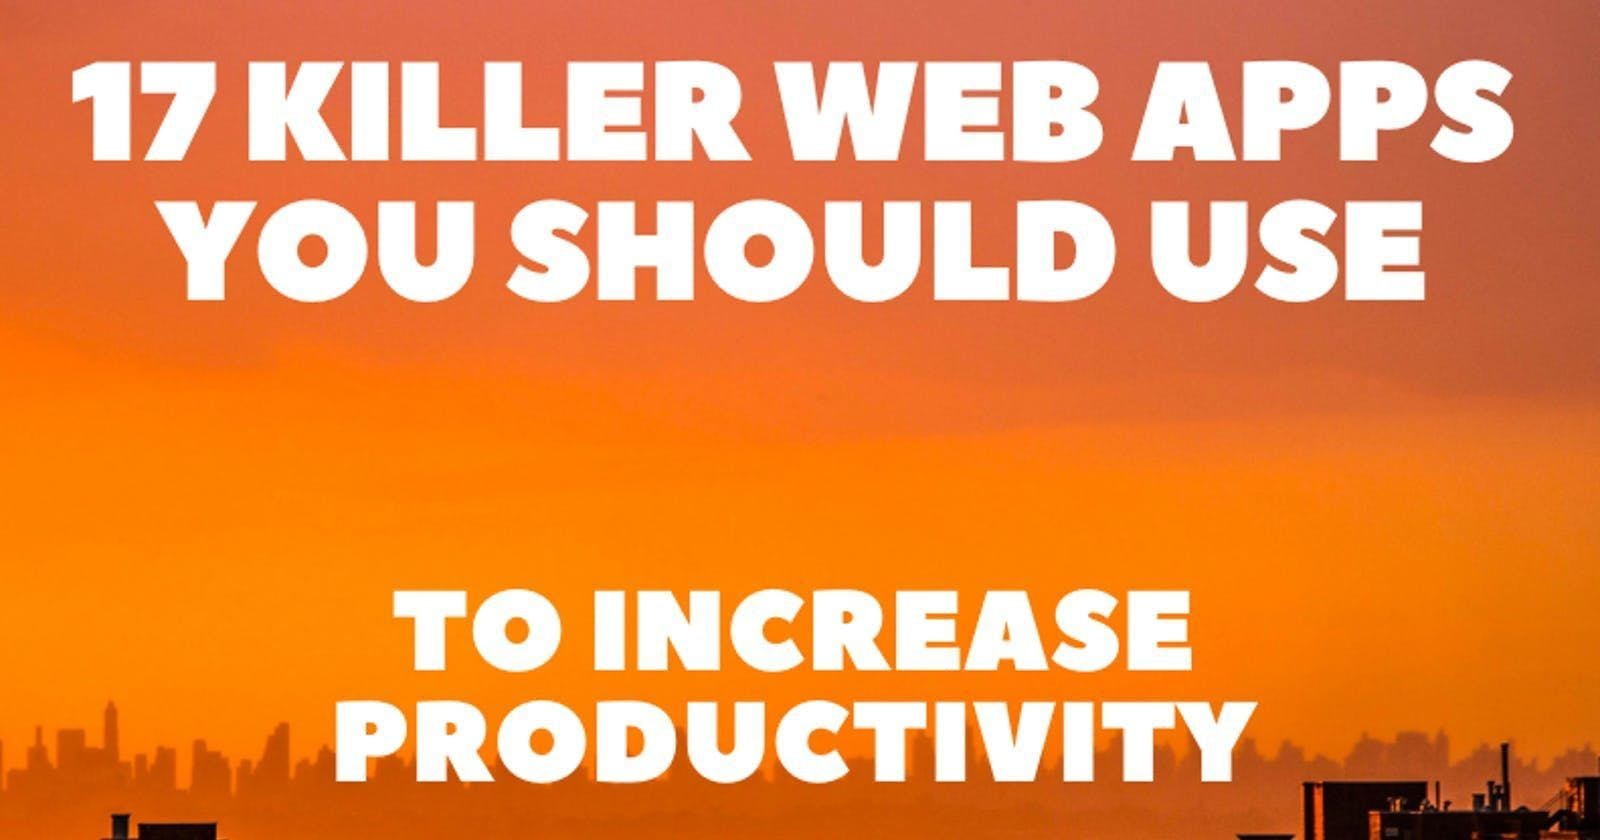 featured image - 17 Killer Web Apps to Increase Productivity 🚀💯